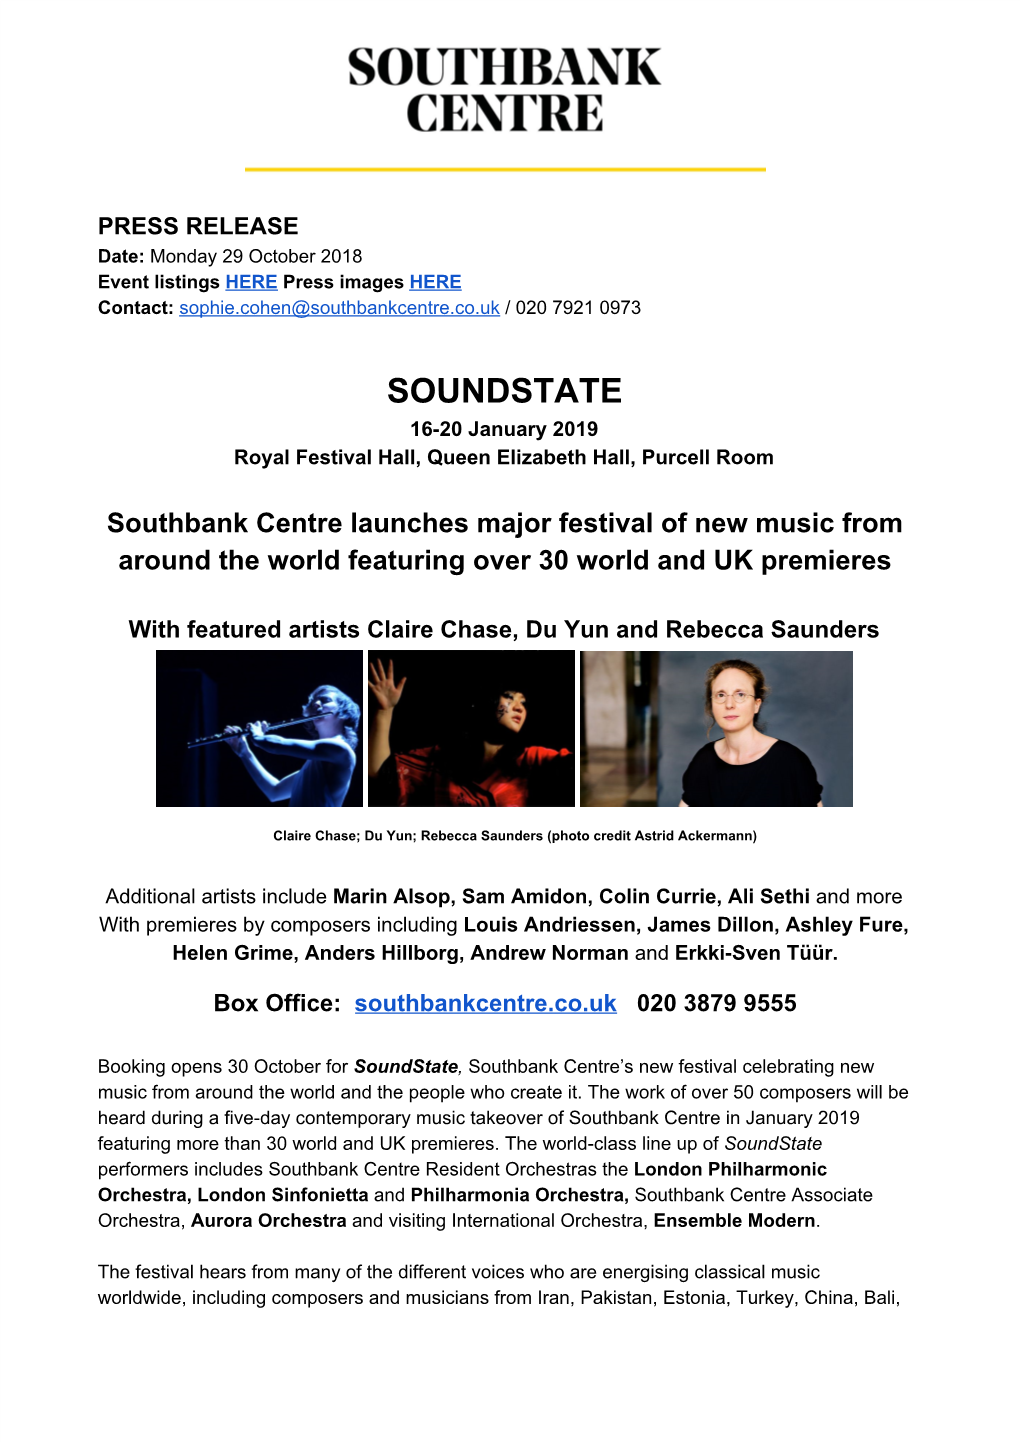 SOUNDSTATE 16-20 January 2019 Royal Festival Hall, Queen Elizabeth Hall, Purcell Room